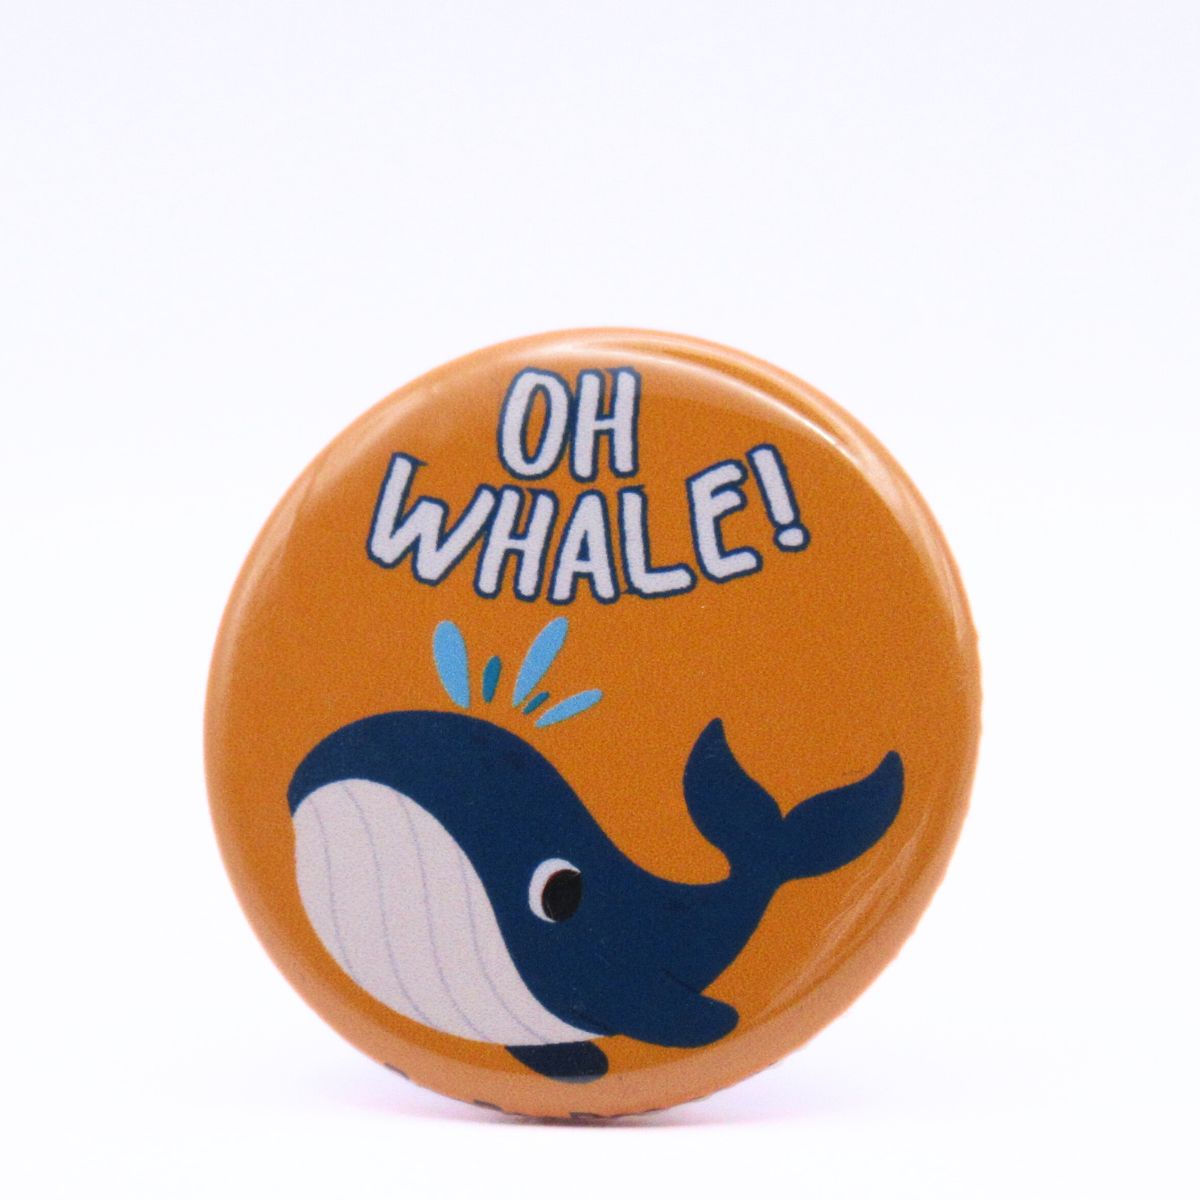 BooBooRoo Pinback Button (i.e. button, badge, pin) of a whale saying, "Oh Whale!"